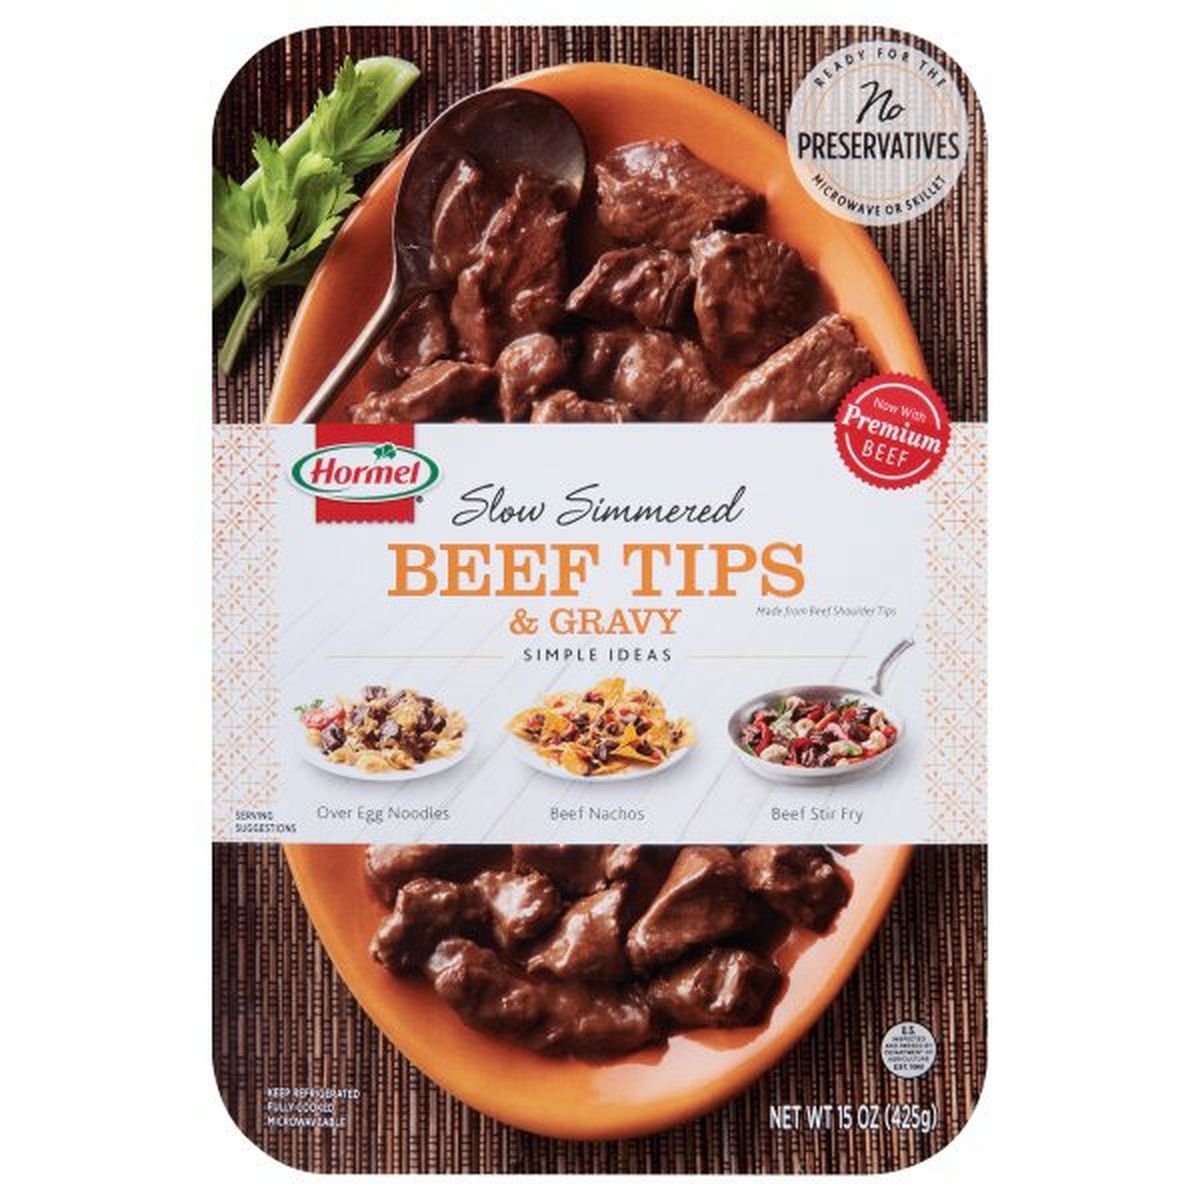 Calories in Hormel Beef Tips & Gravy, Slow Simmered